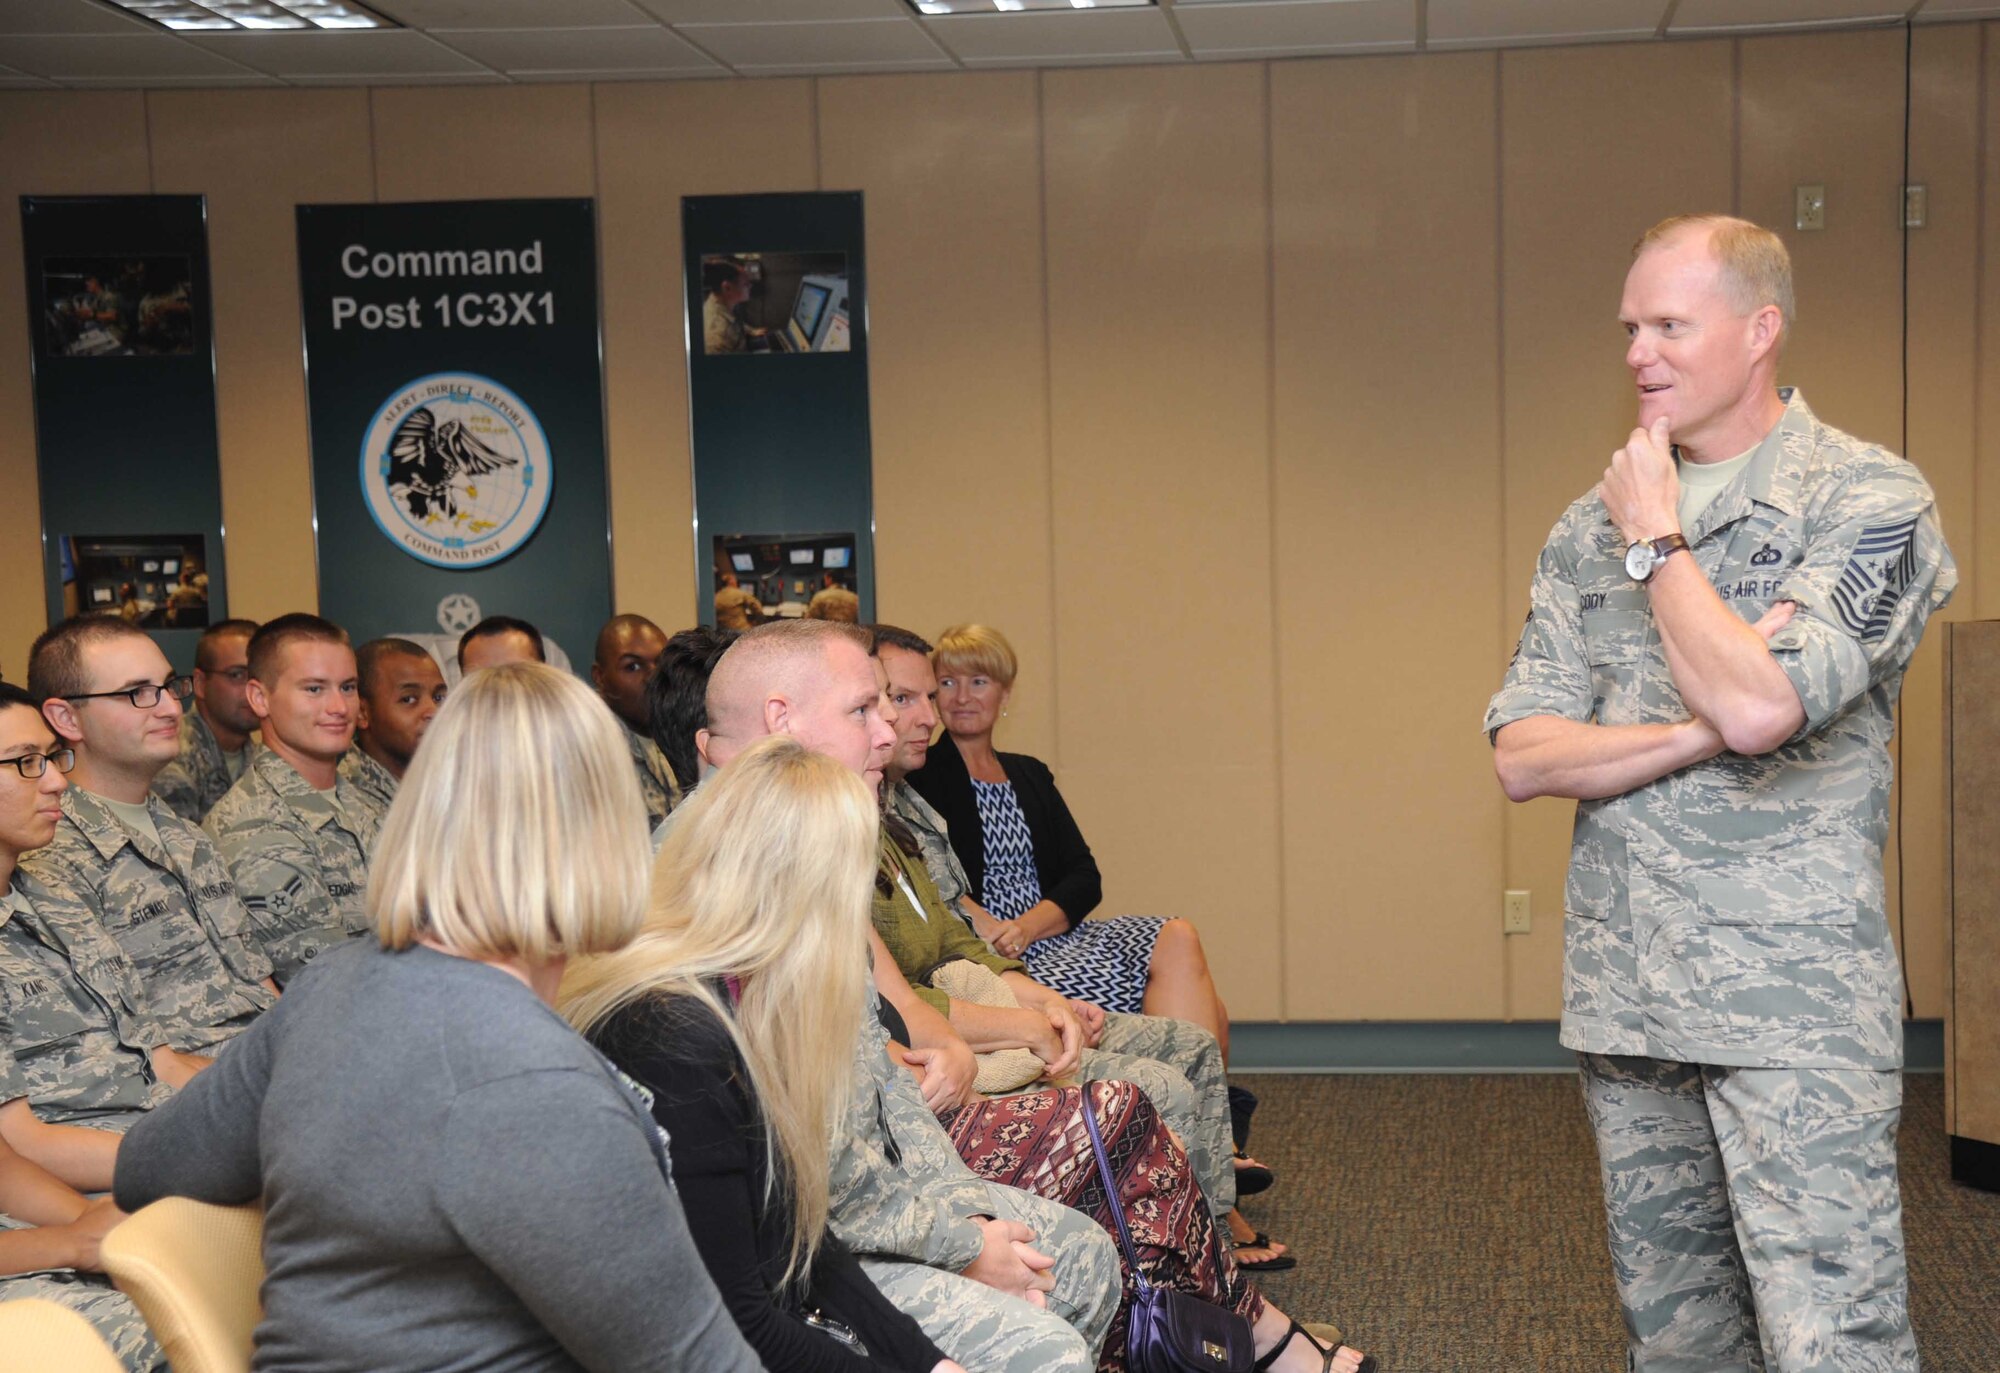 Chief Master Sgt. of the Air Force James A. Cody addresses 334th Training Squadron air traffic control students during a two-day visit of Keesler Air Force Base, Miss., Sept. 22-23, 2014. The purpose of the visit was to thank Team Keesler members and further understand the various missions here, including 2nd Air Force, 81st Training Wing and the 403rd Wing. (U.S. Air Force photo by Kemberly Groue)